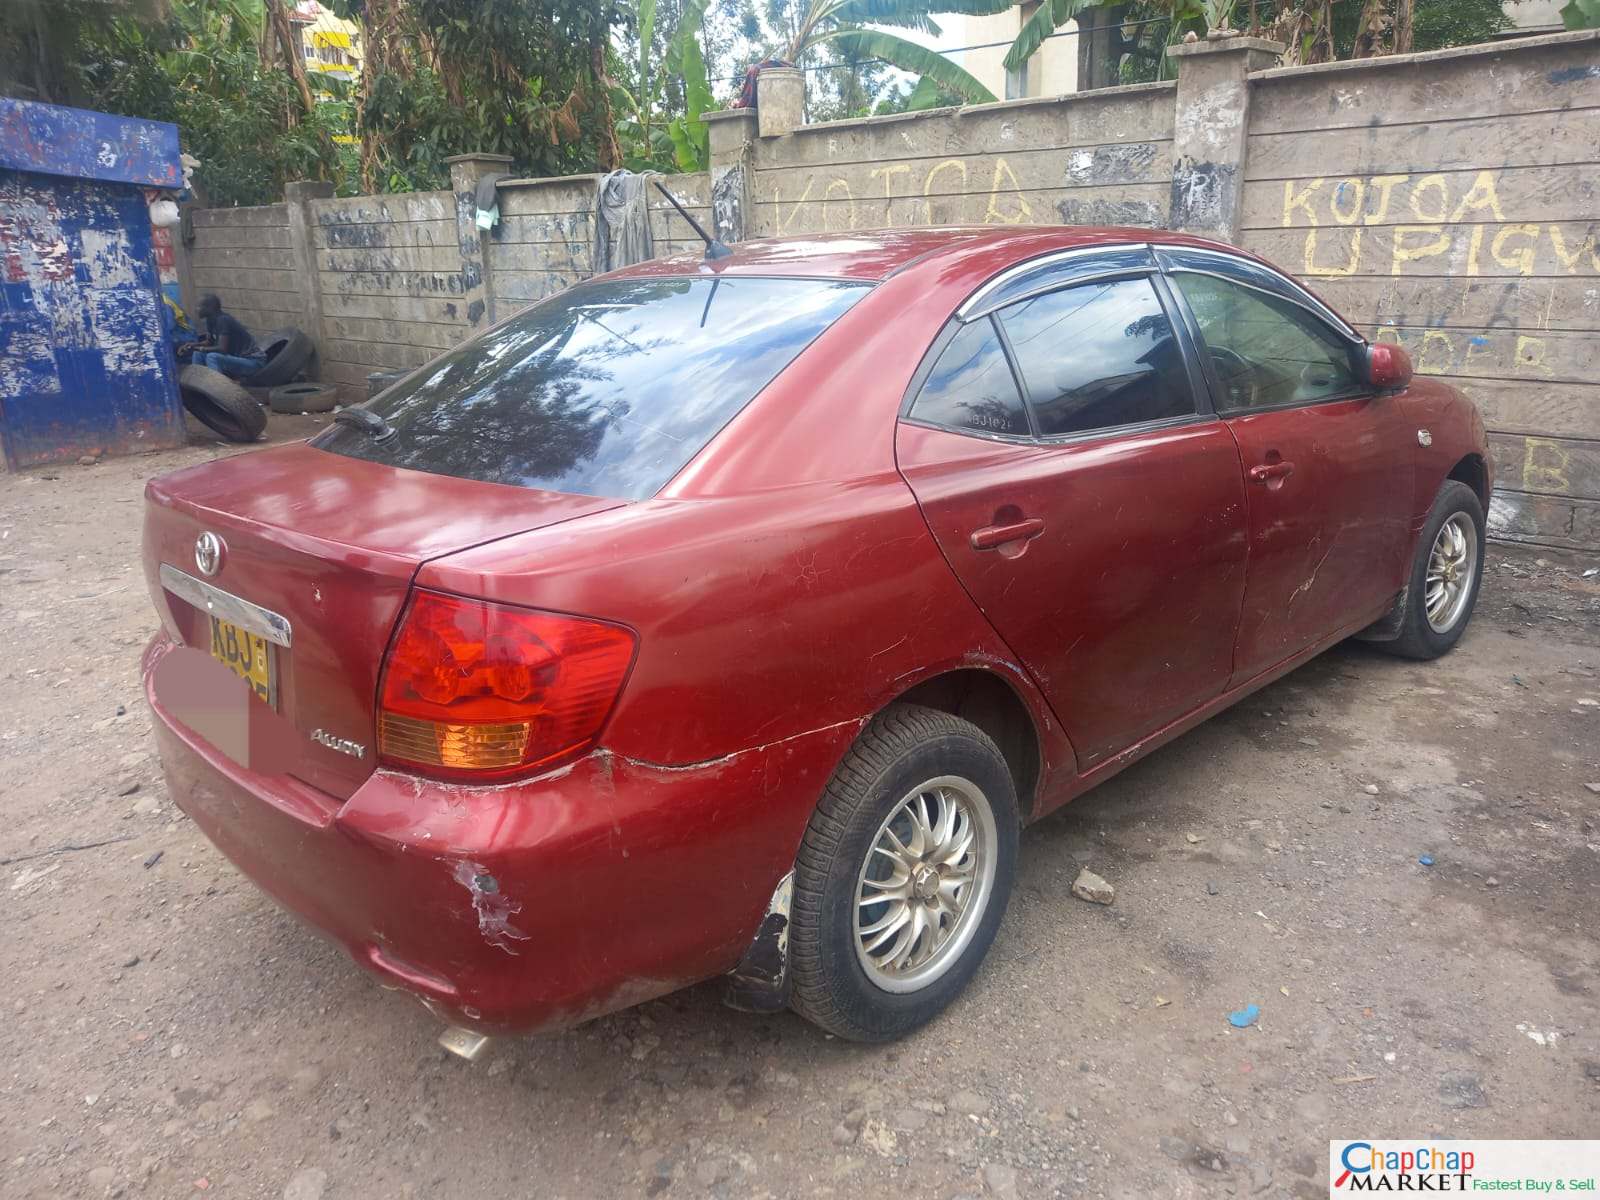 Toyota Allion 2003 420k ONLY You Pay 30% Deposit 70% INSTALLMENTS Trade in OK EXCLUSIVE